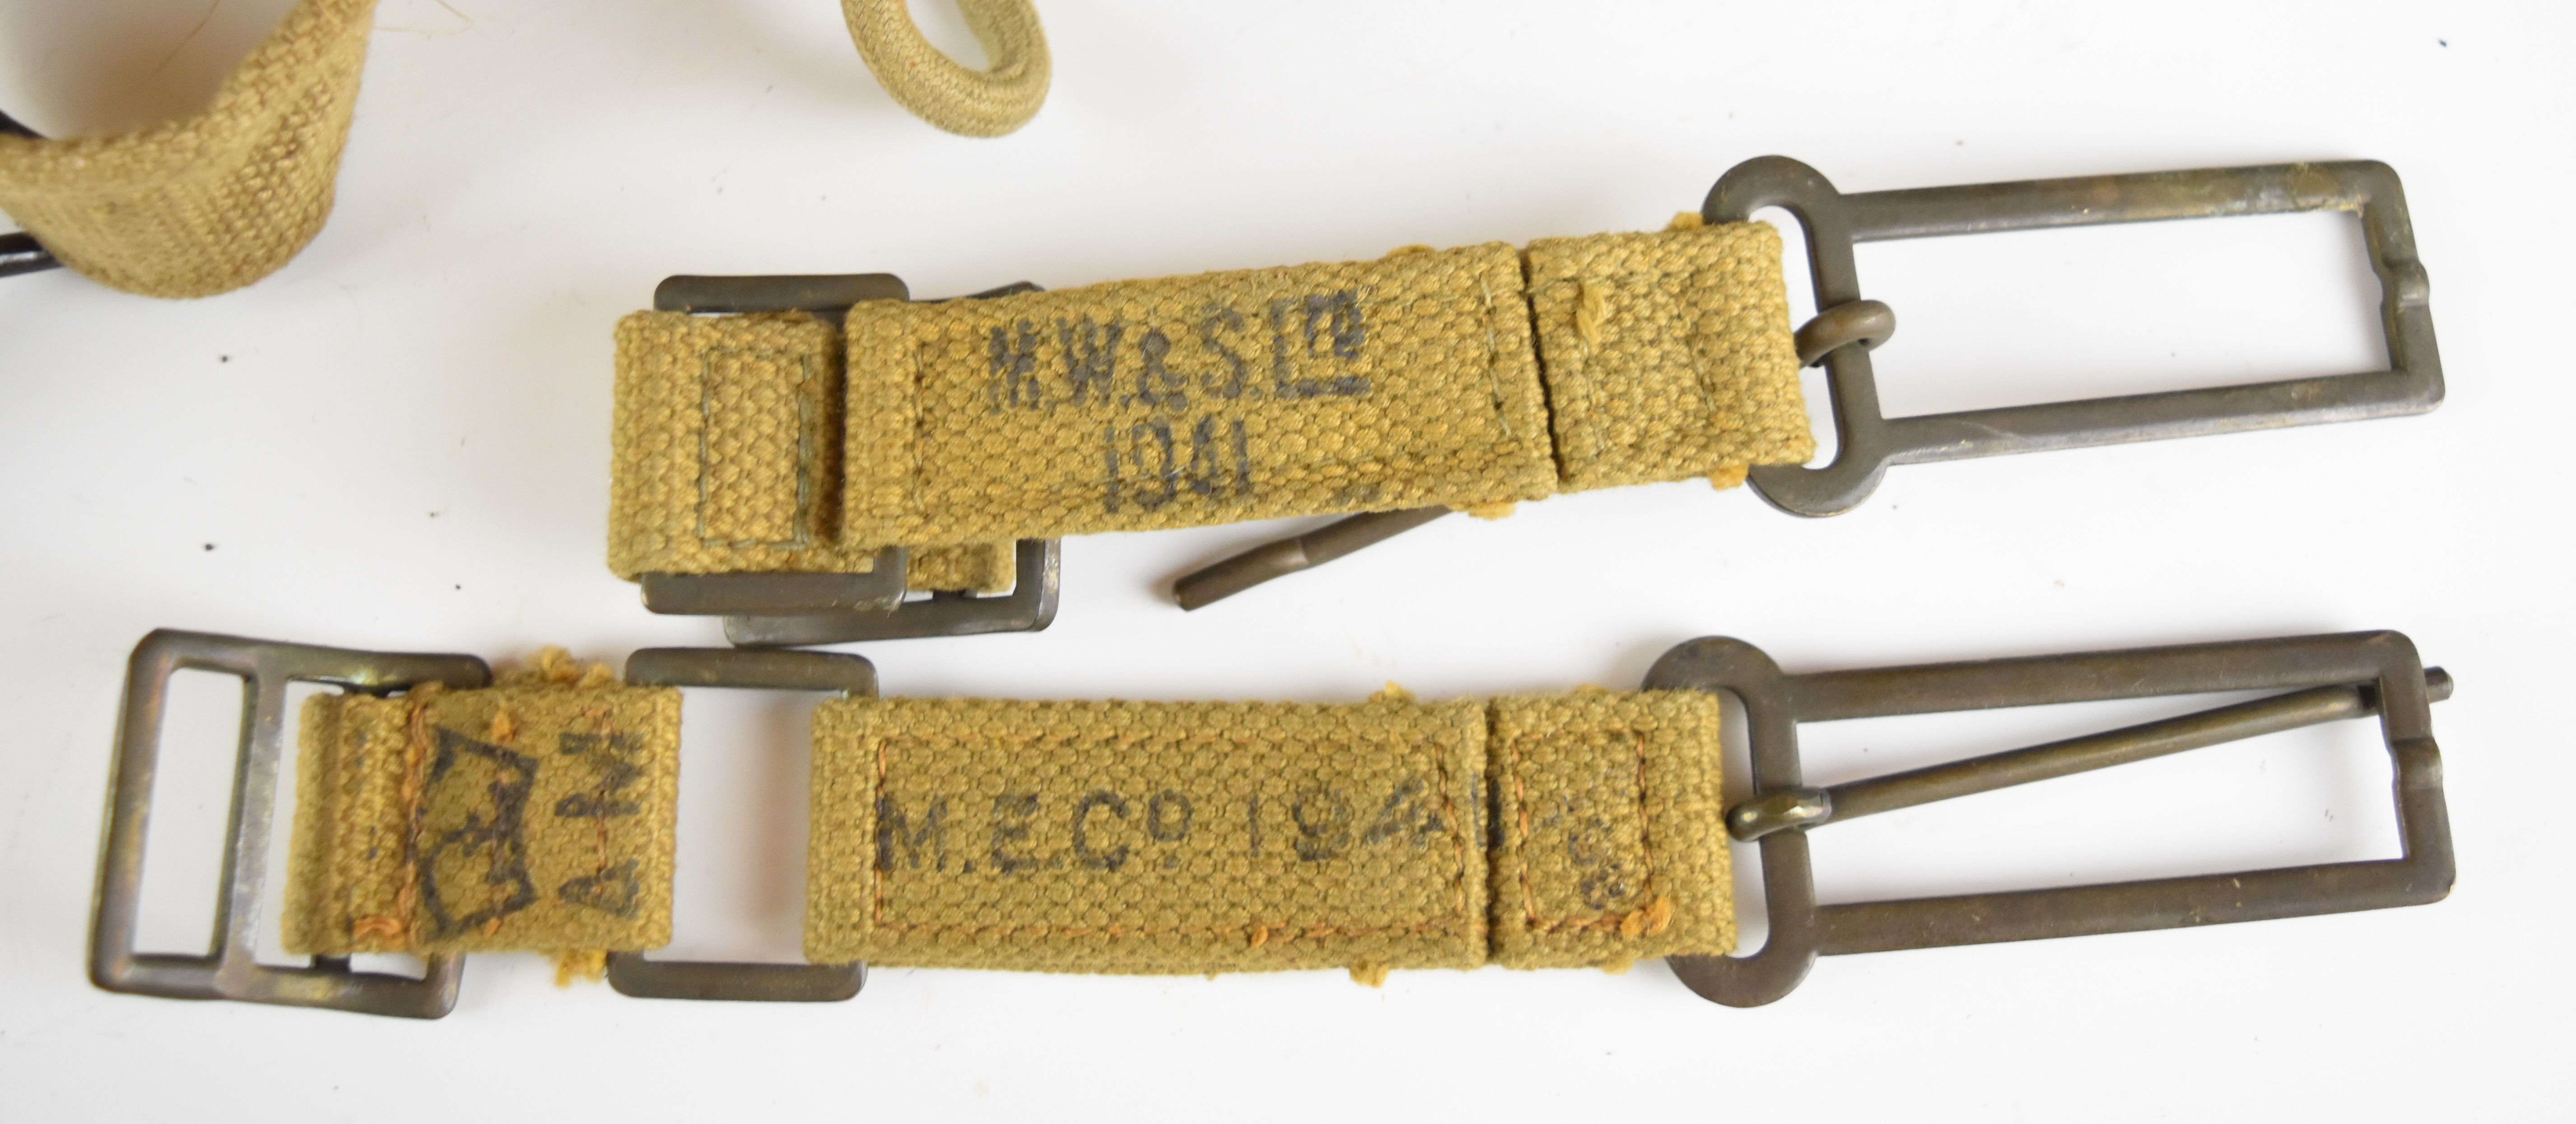 British WW2 webbing including ammunition pouches, belts, holsters, sling, lanyard and haversack, all - Image 4 of 11